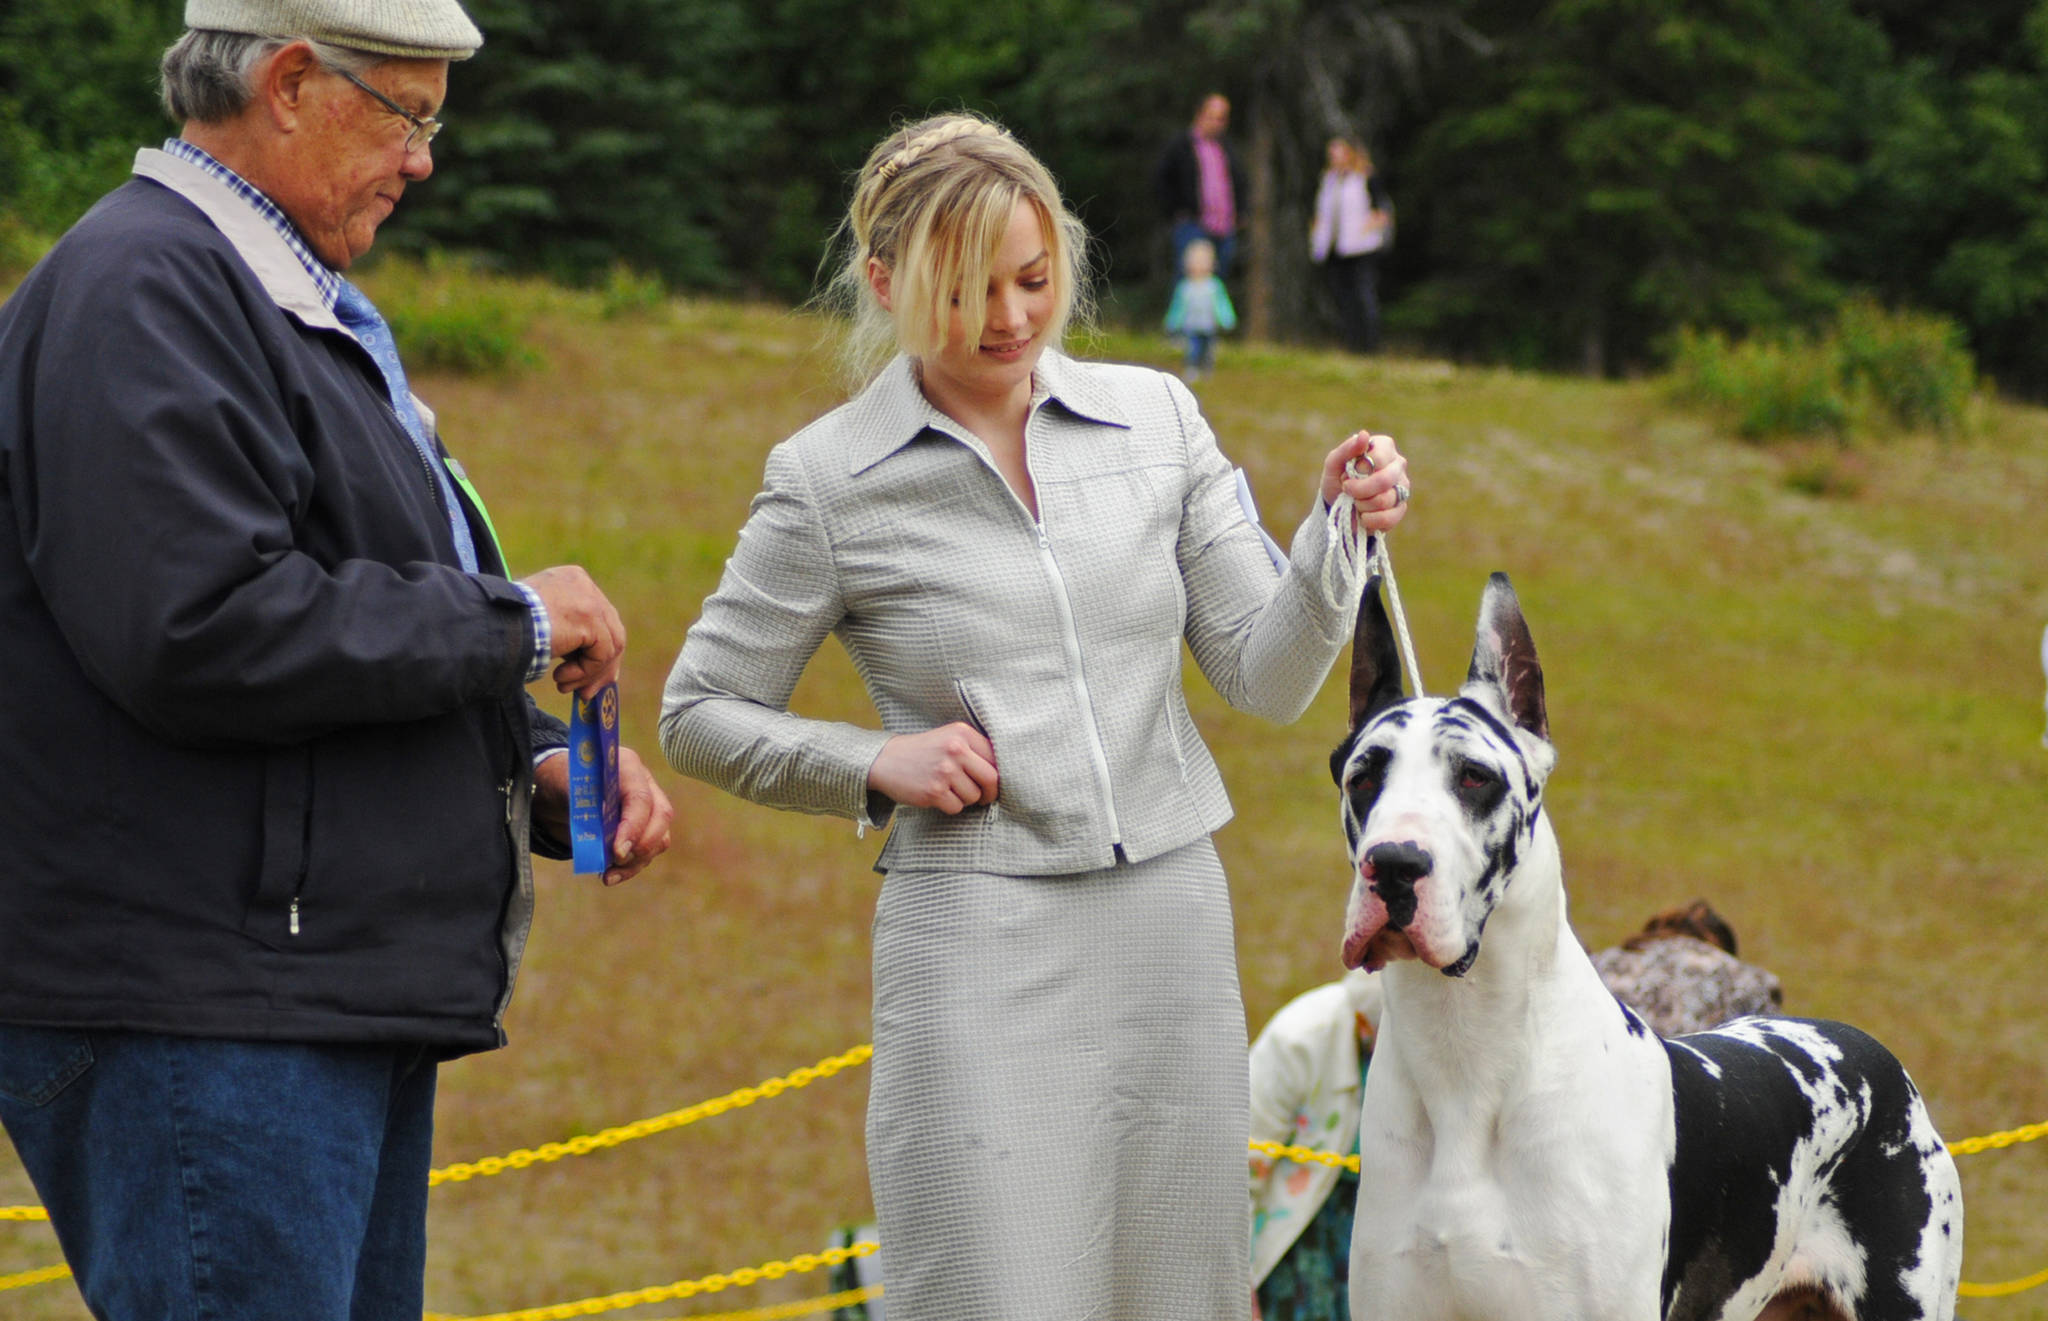 A trainer holds her Great Dane for a picture competing in the Kenai Kennel Club’s annual dog show, obedience and agility trials on Saturday, July 14, 2018 in Soldotna, Alaska. Dog owners come from all over the state to take part in the events each year. (Photo by Elizabeth Earl/Peninsula Clarion)